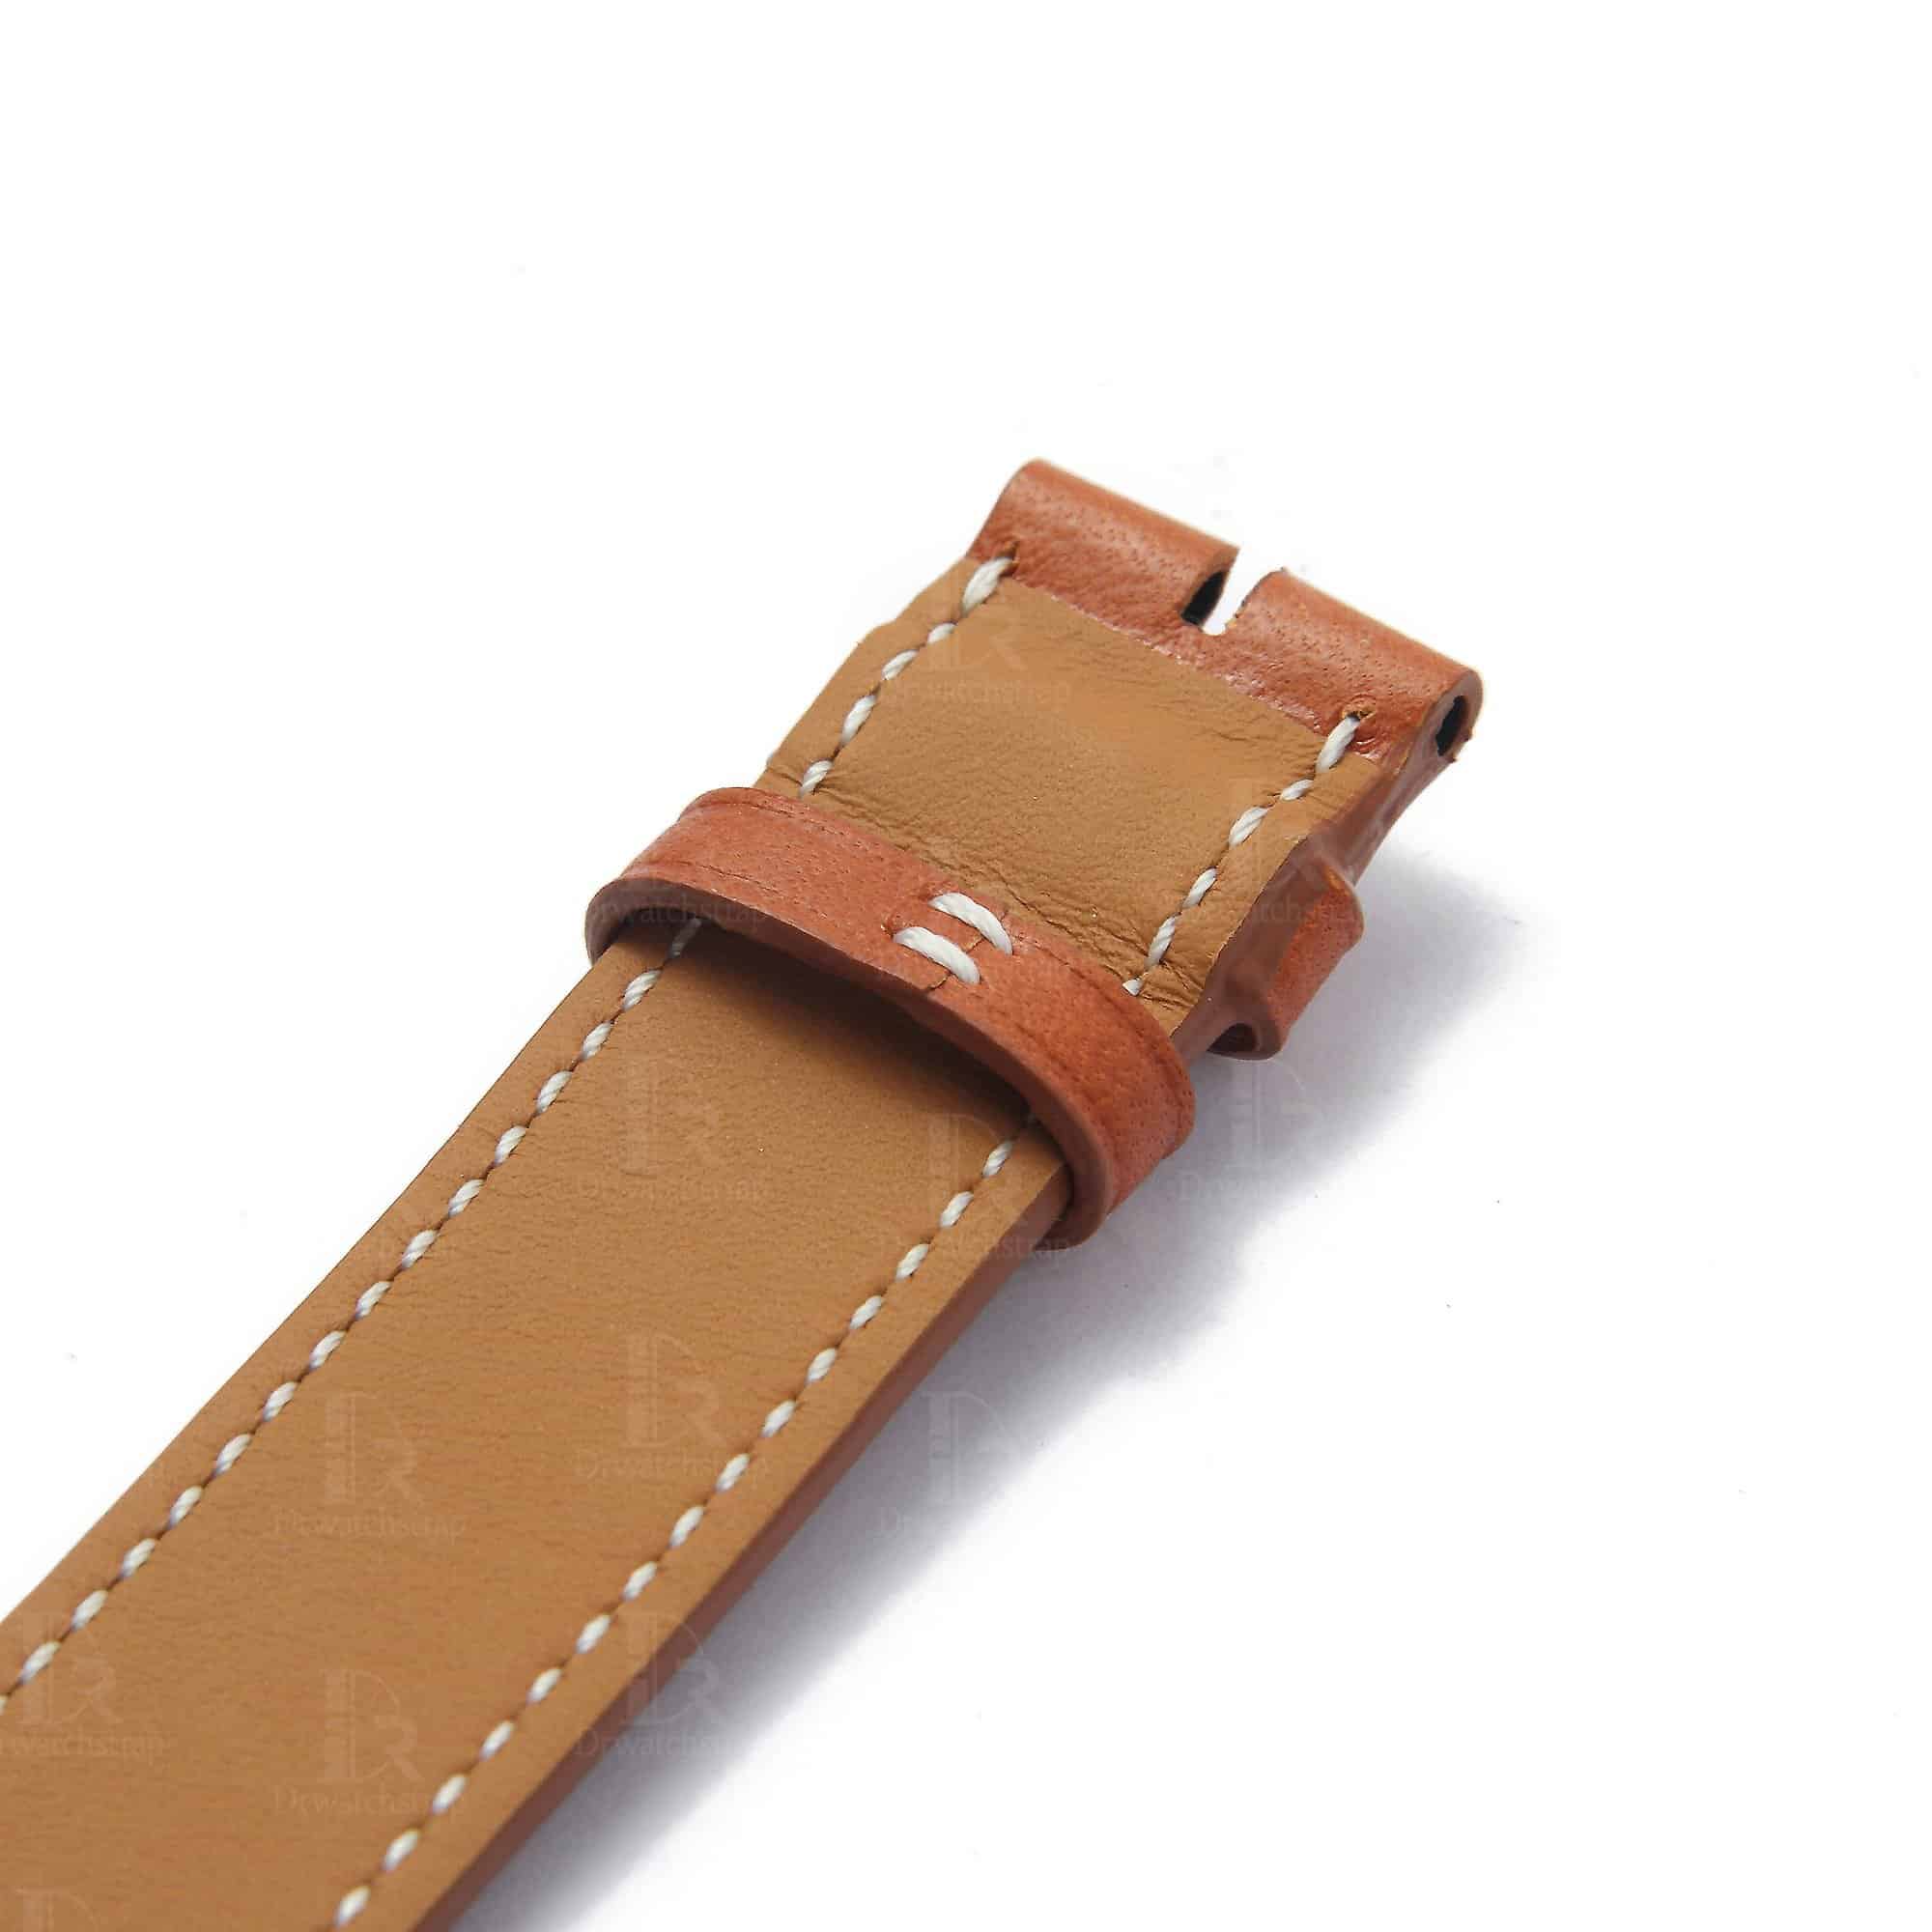 Custom Premium high-end quality calfskin replacement brown leather Hermes watch band and Hermes strap for Hermes Cape cod, Heure H, Arceau watches for sale - double wrap and double tour sport watch band with white stitching quick release quickswitch online